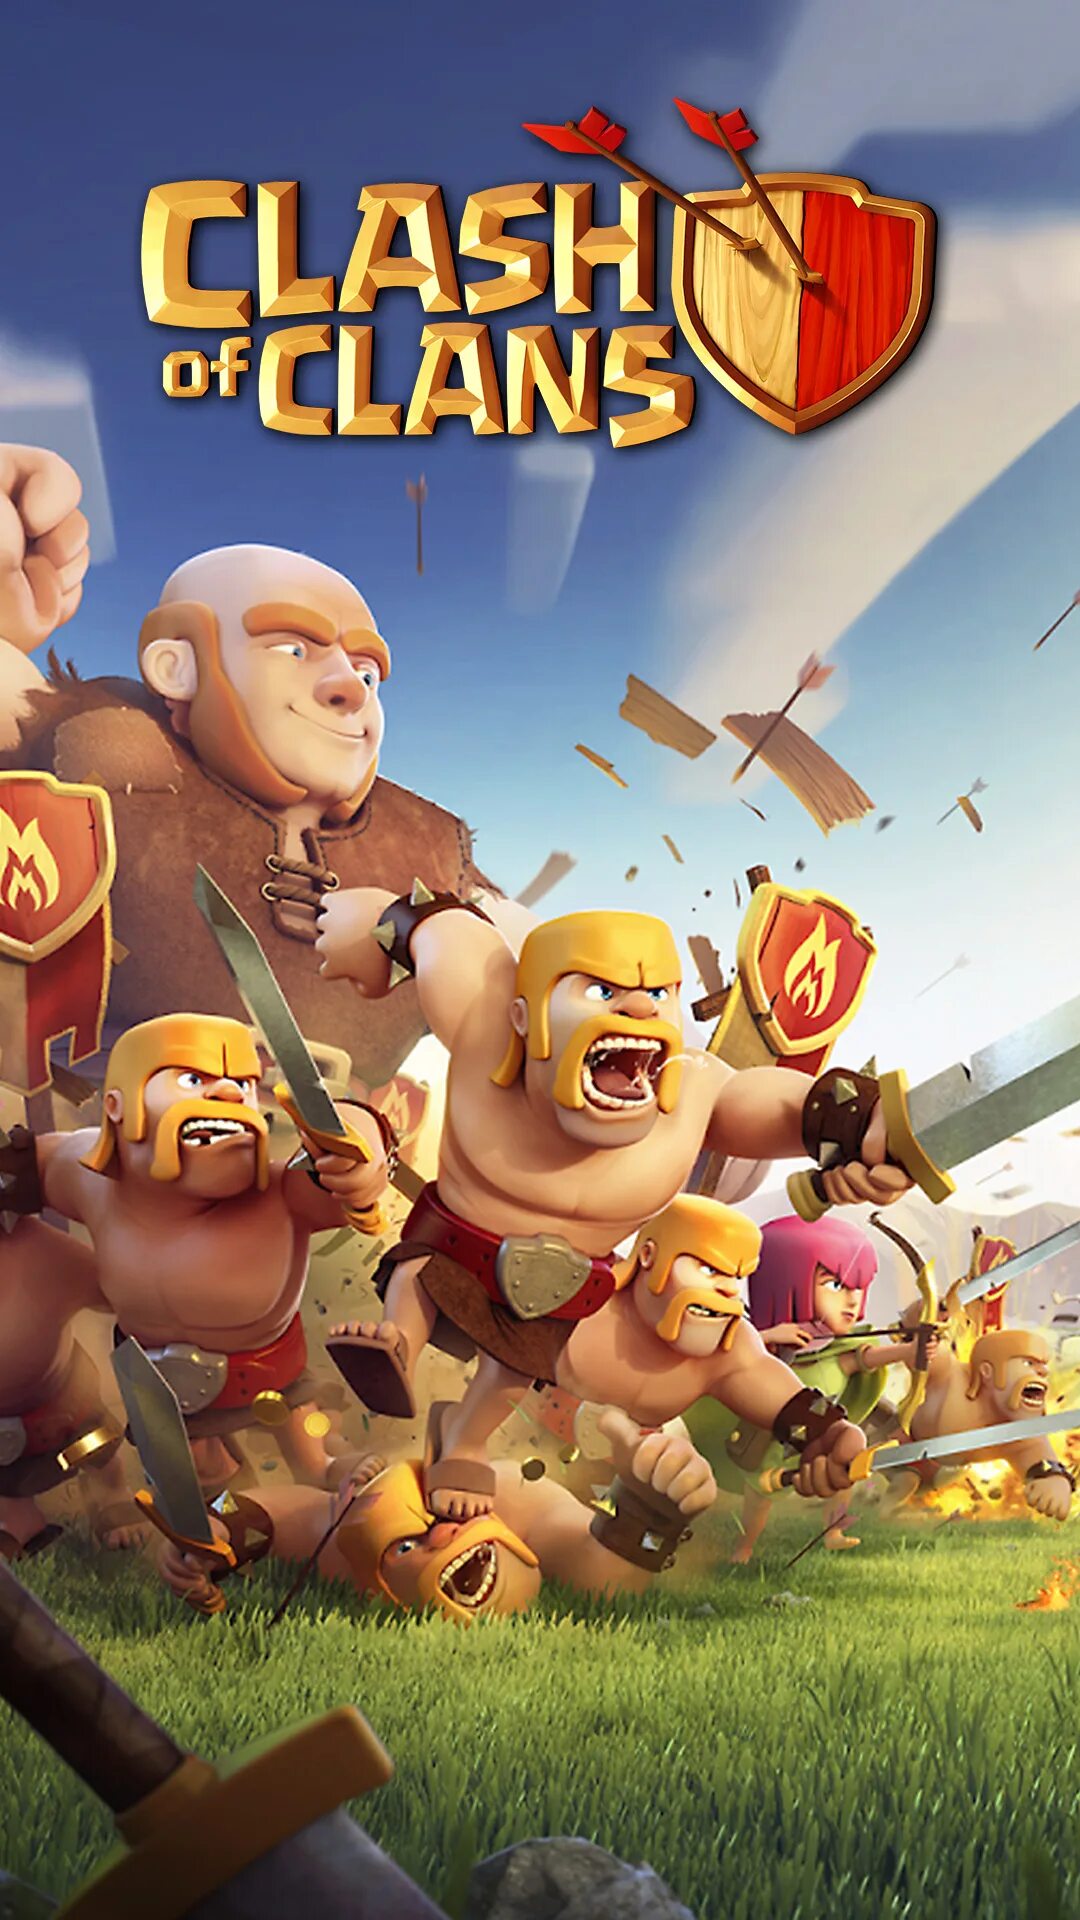 Clash of clans play. Клэш оф кланс. Игра игра Clash of Clans. 2 Игра Clash of Clans. Clan Clan.